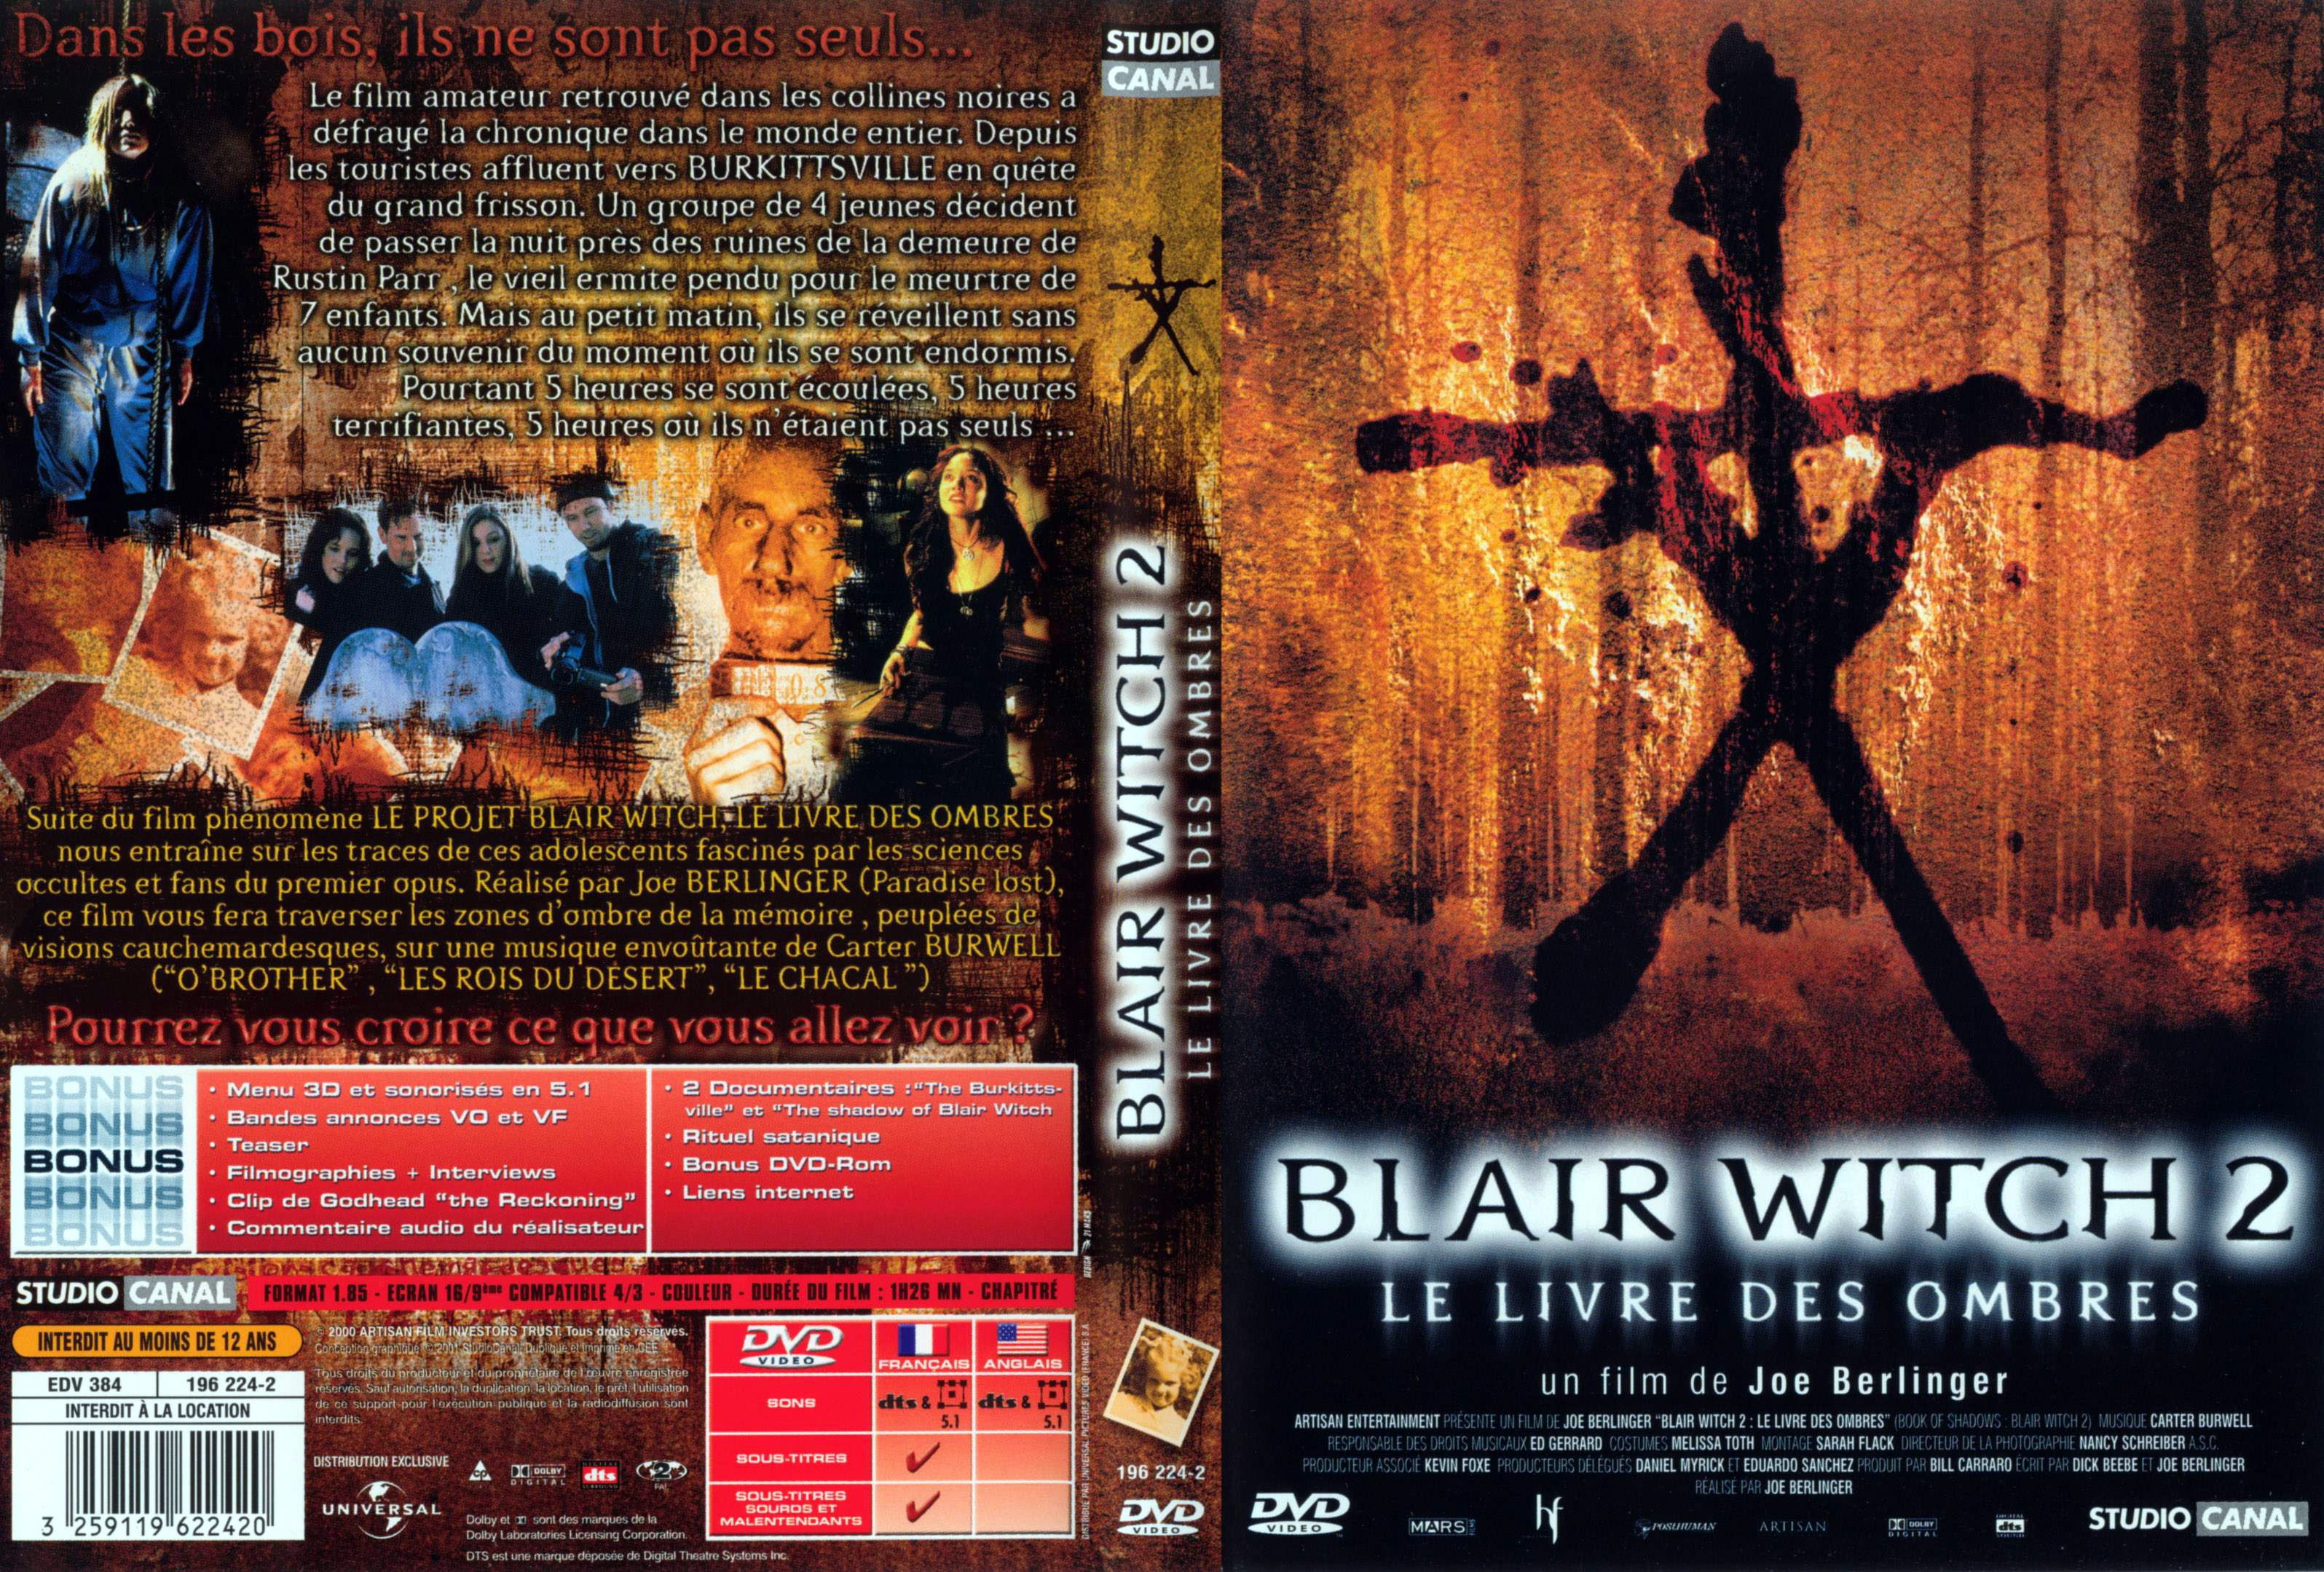 Jaquette DVD Blair witch 2